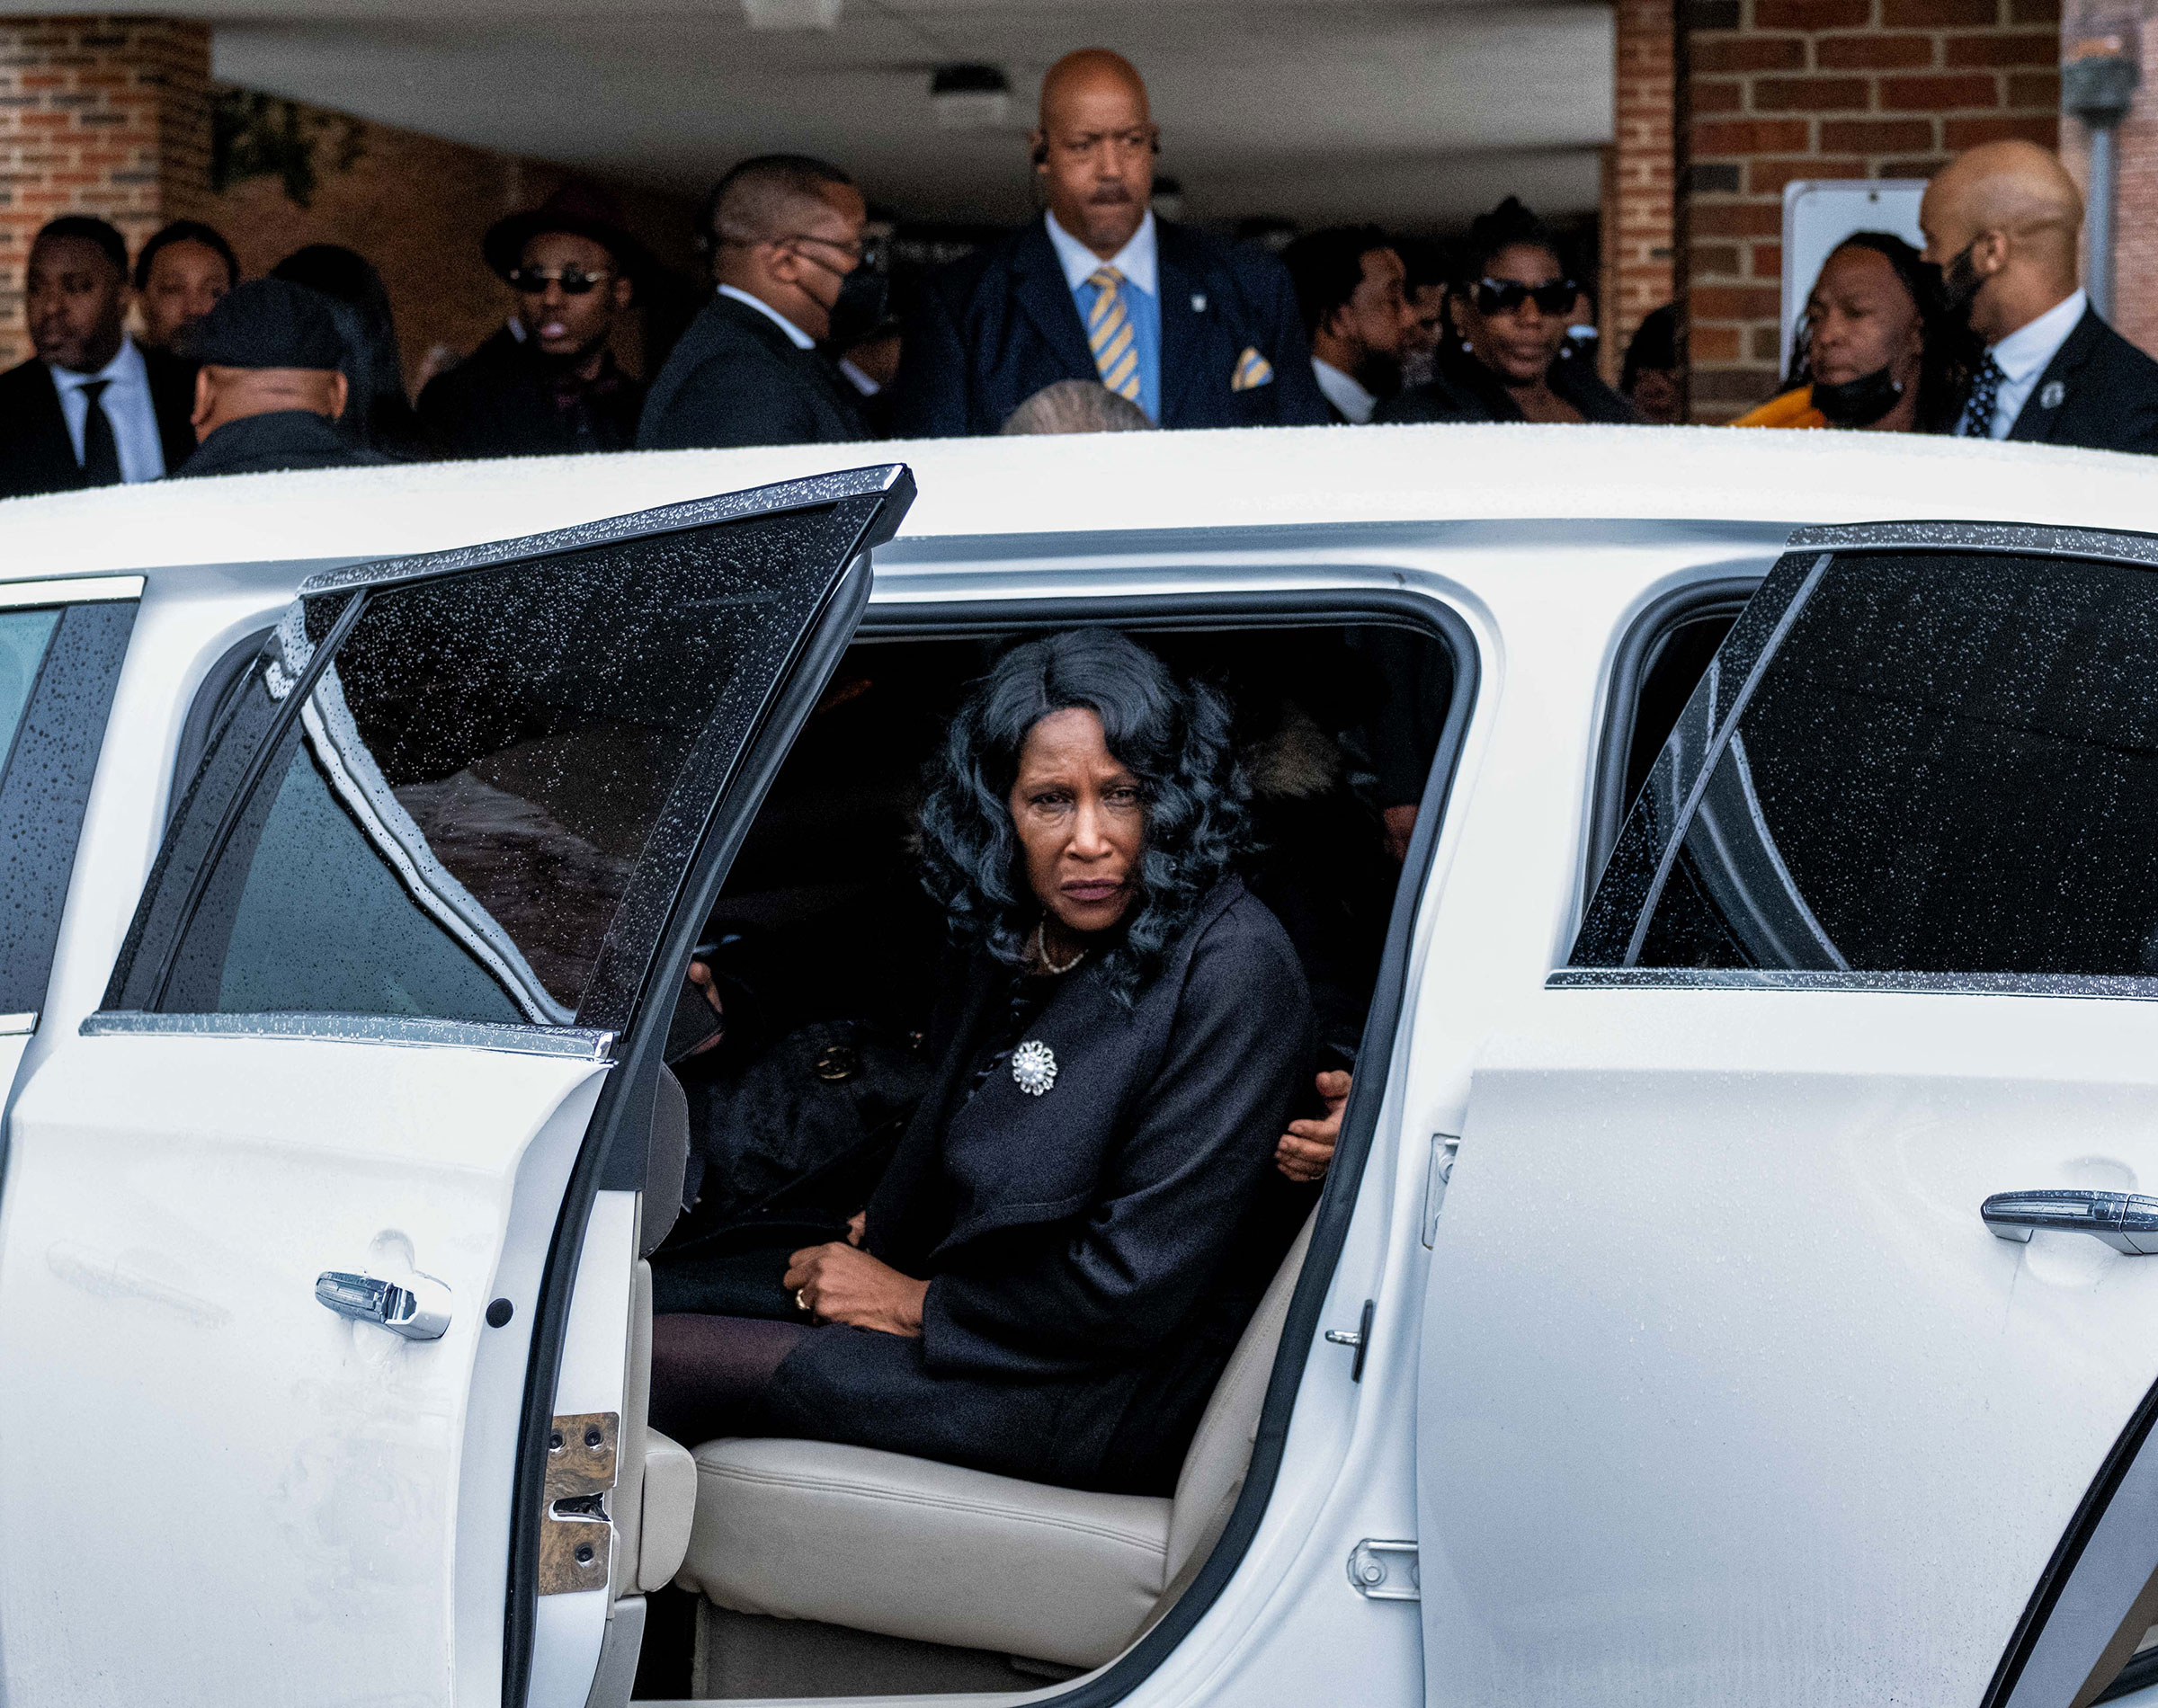 Tyre Nichols' mother RowVaughn Wells looks on after the funeral service for her son at Mississippi Boulevard Christian Church in Memphis, Tenn., on Feb. 1